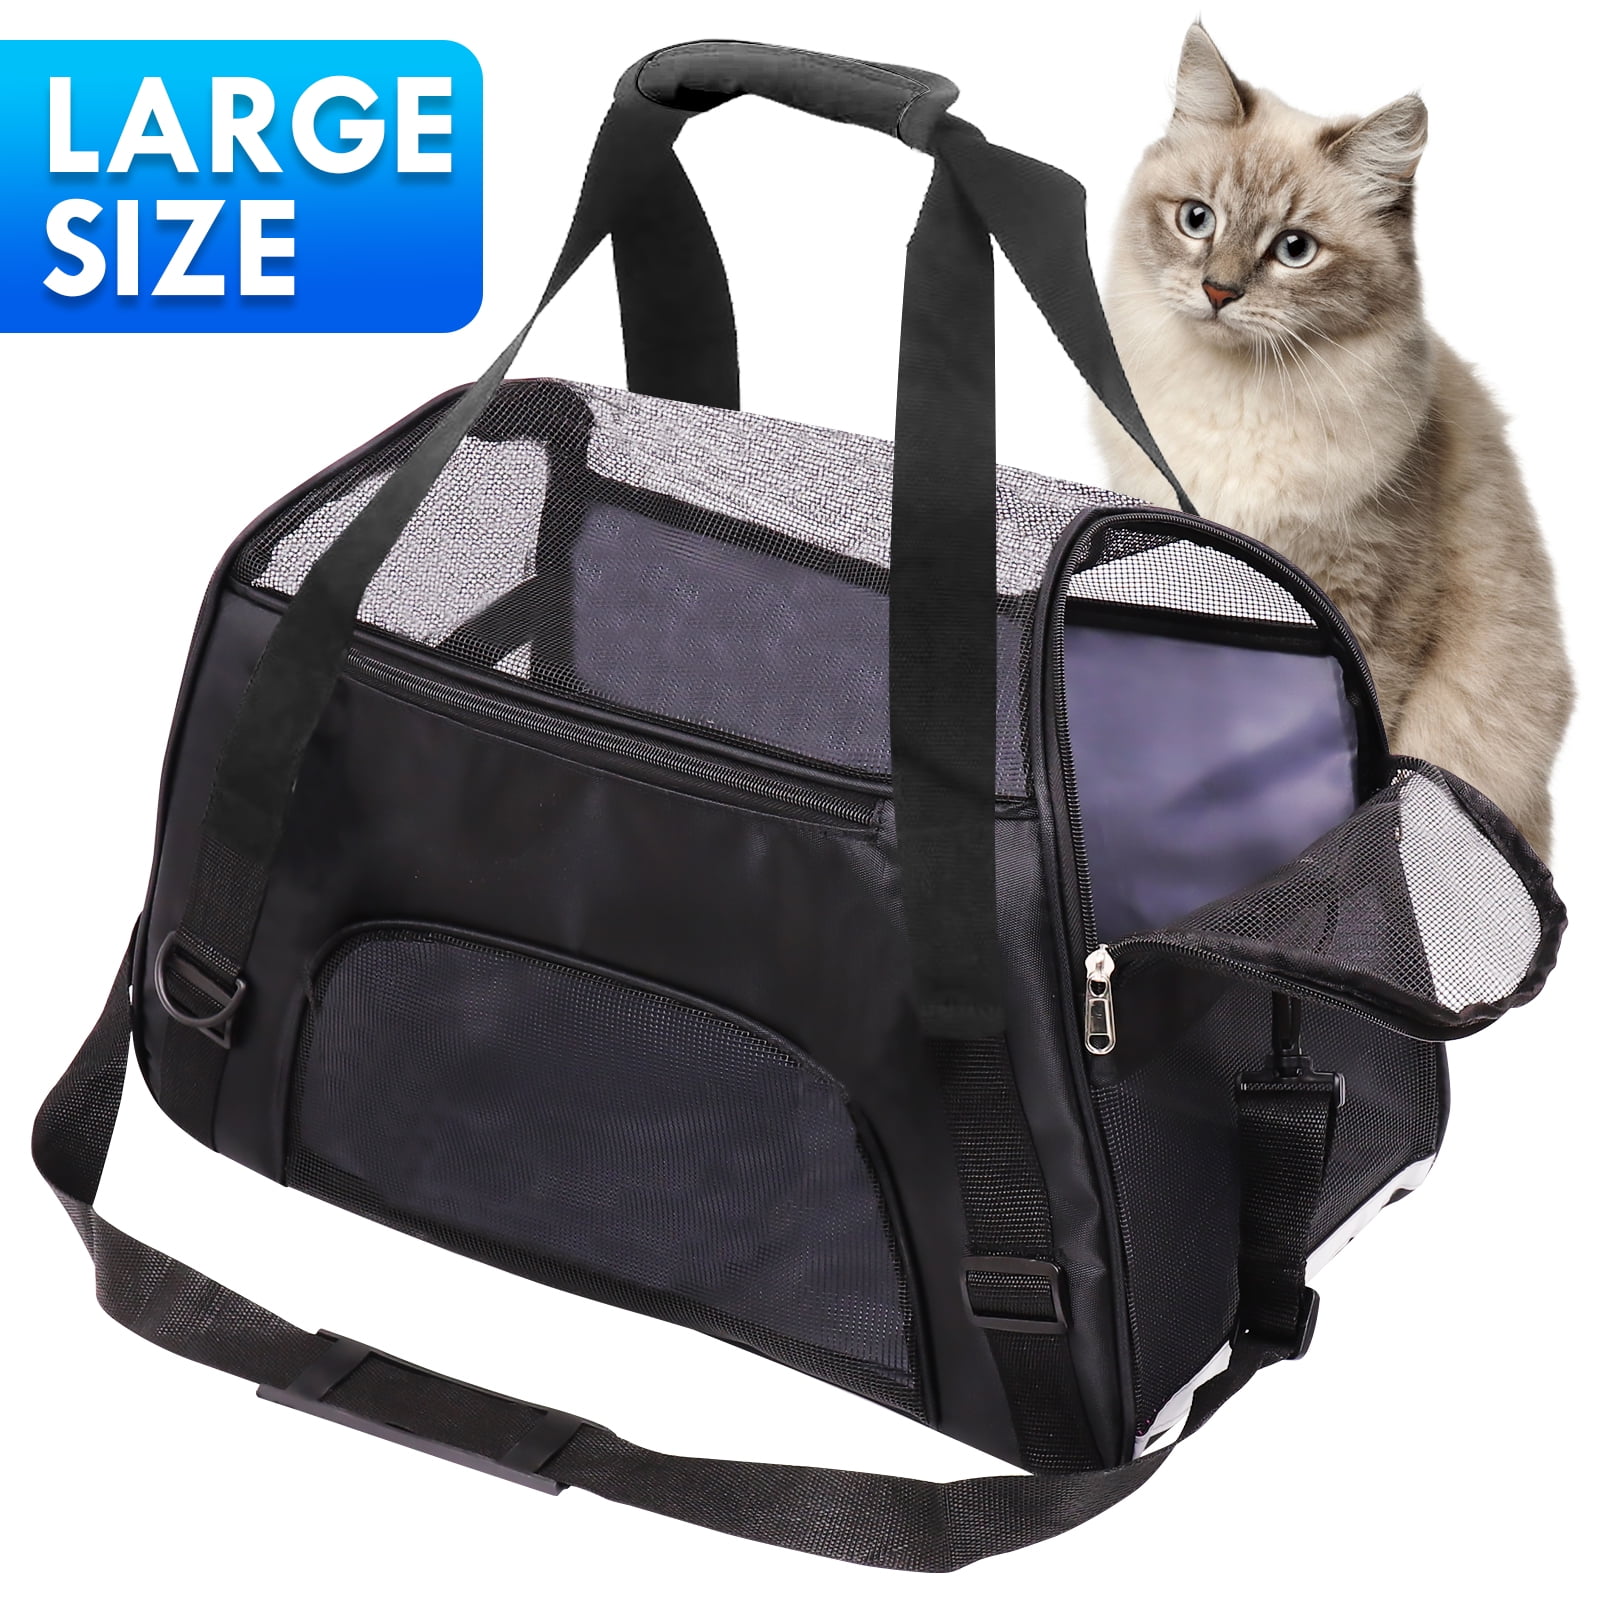 ZLELOUY 20.5x10x14 Cat Carrier Airline Approved Pet Carrier Bag,  Soft-Sided Pet Travel Carrier for Cats Dogs Pet Bag,Max 16.5Lbs 